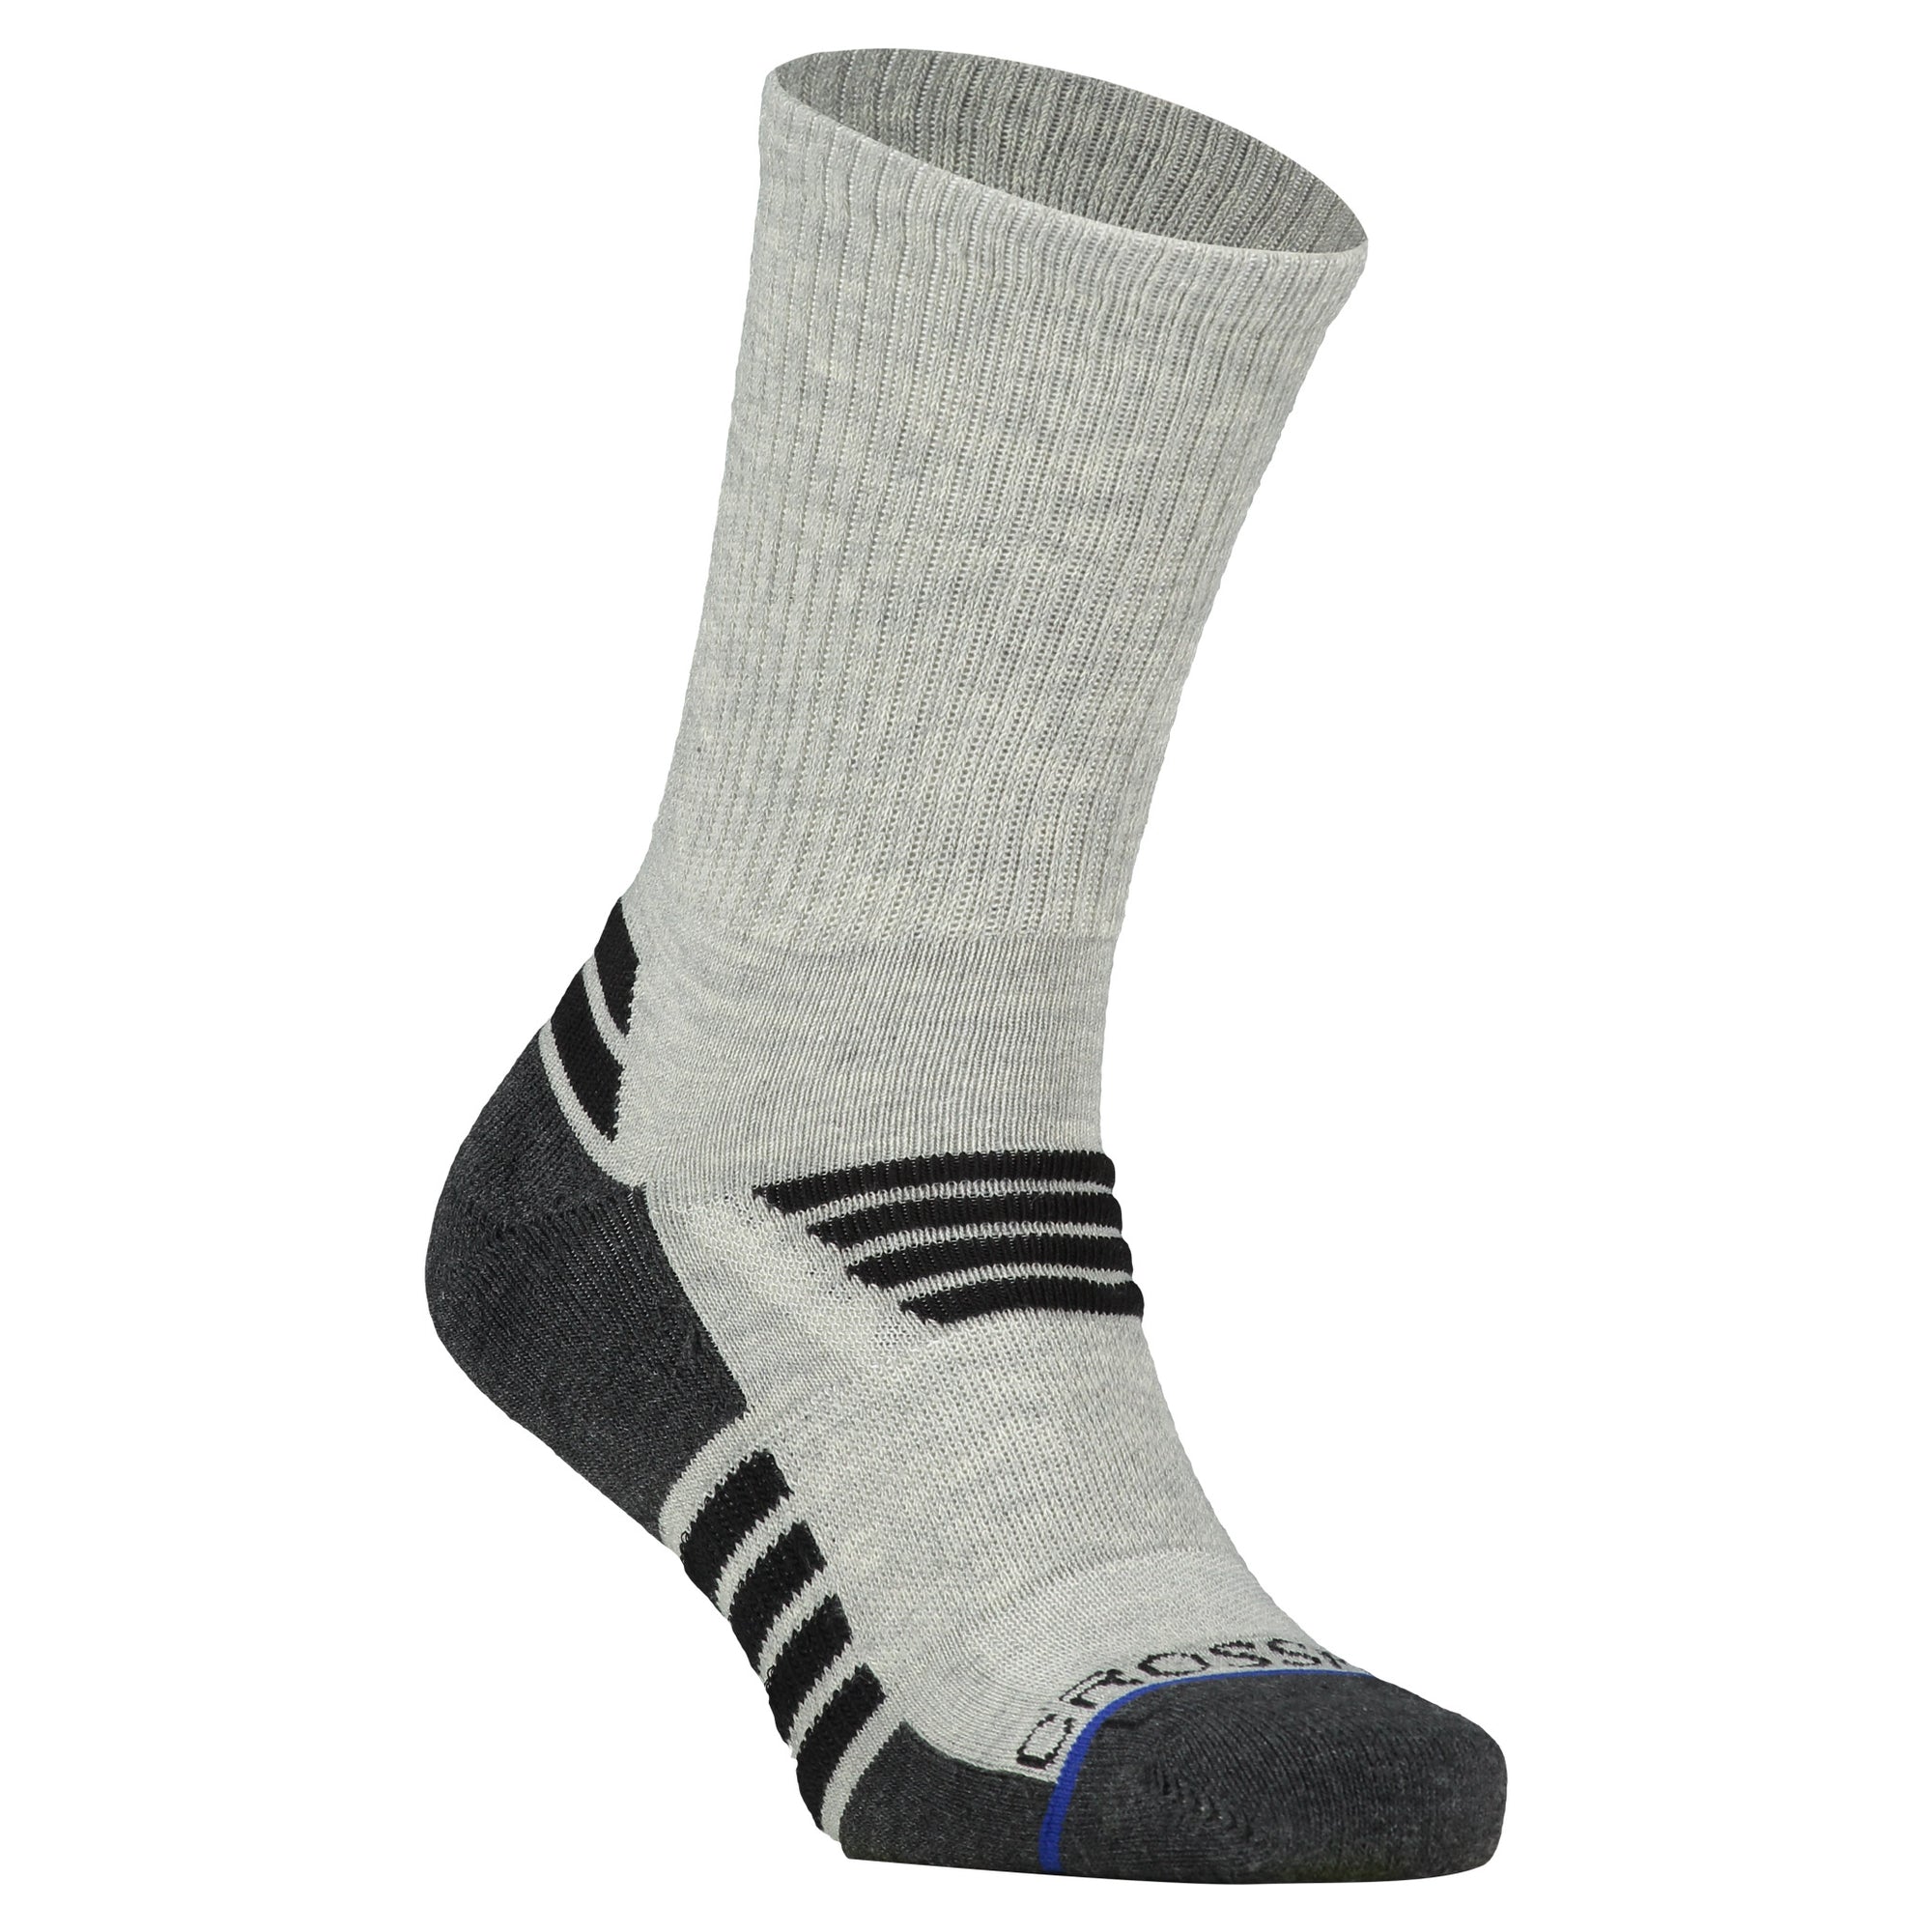 Crossfly men's Tempo Crew Socks in grey / black from the Performance series, featuring AirBeams and 180 Hold.